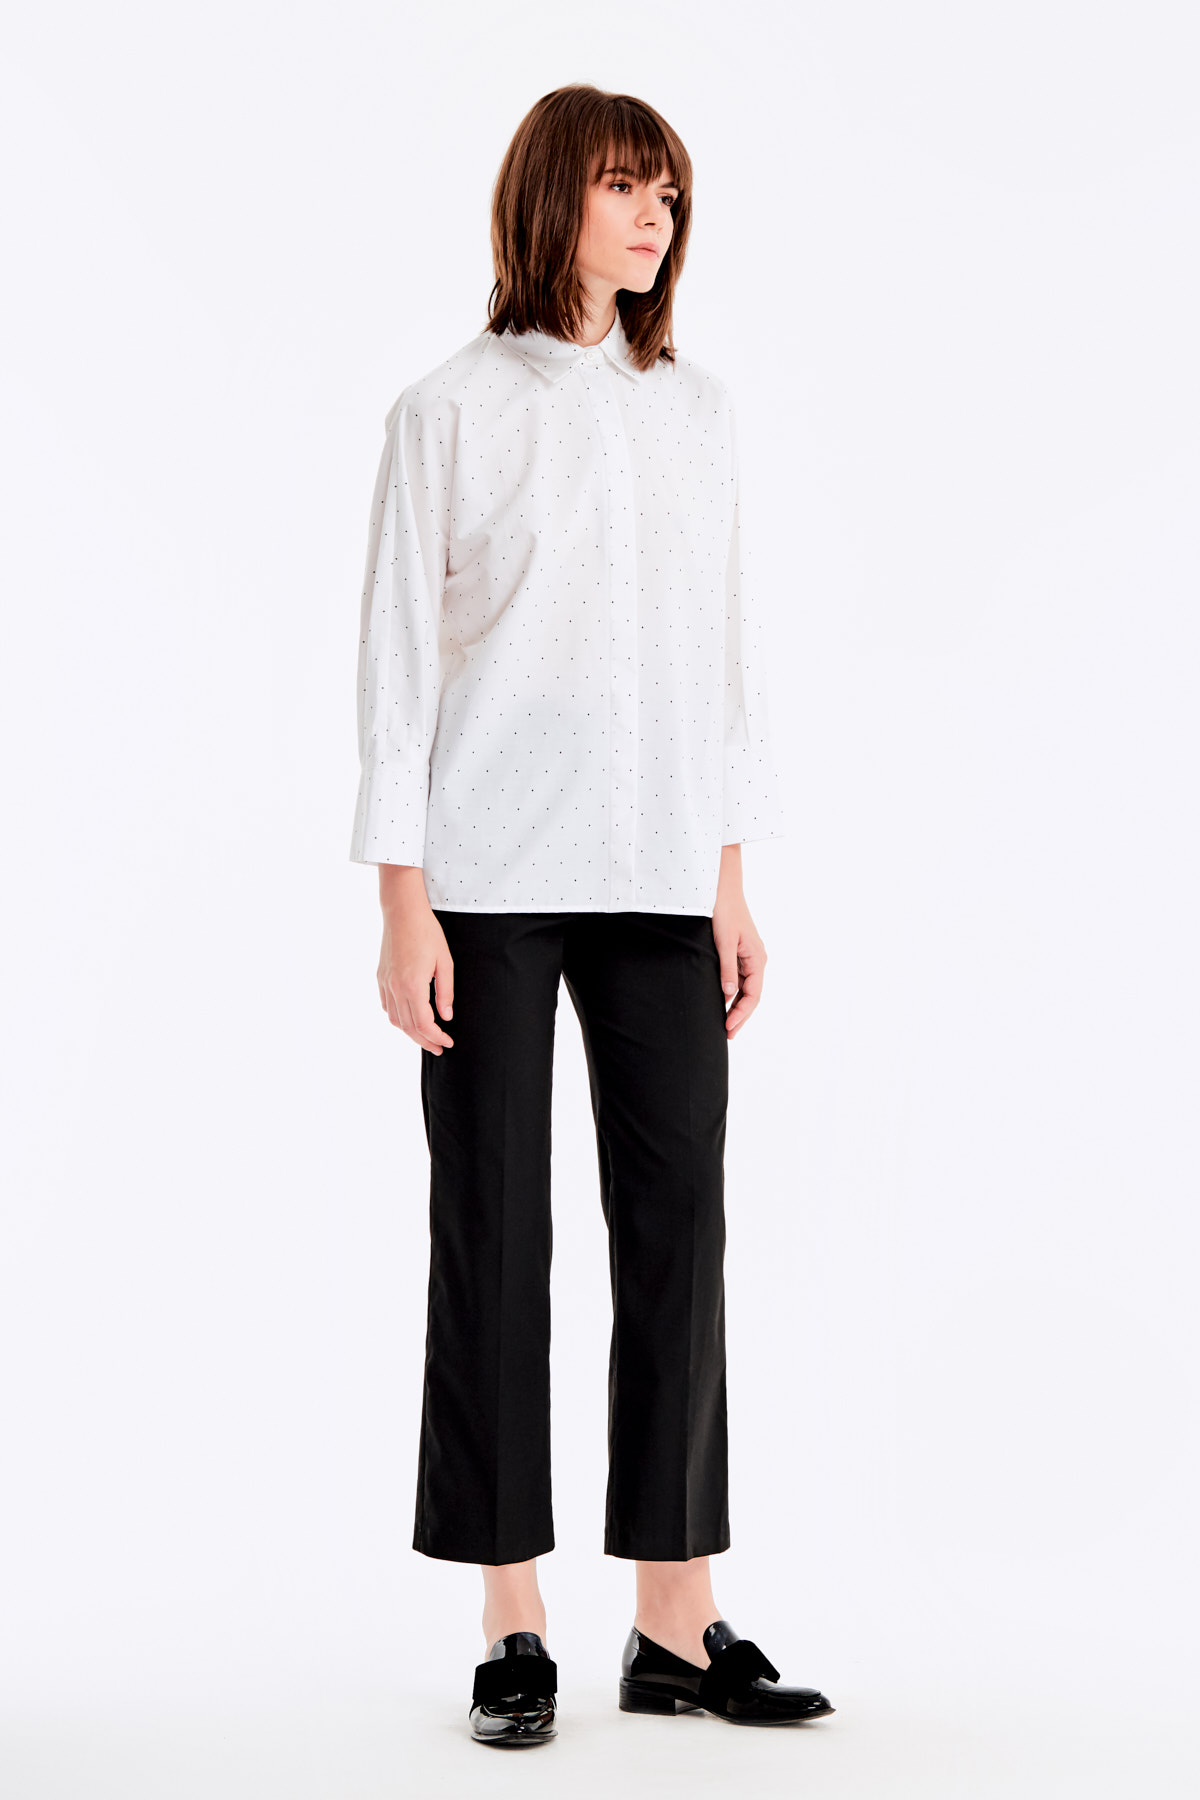 Loose-fitting white shirt with a black polka dot print and a concealed placket, photo 6